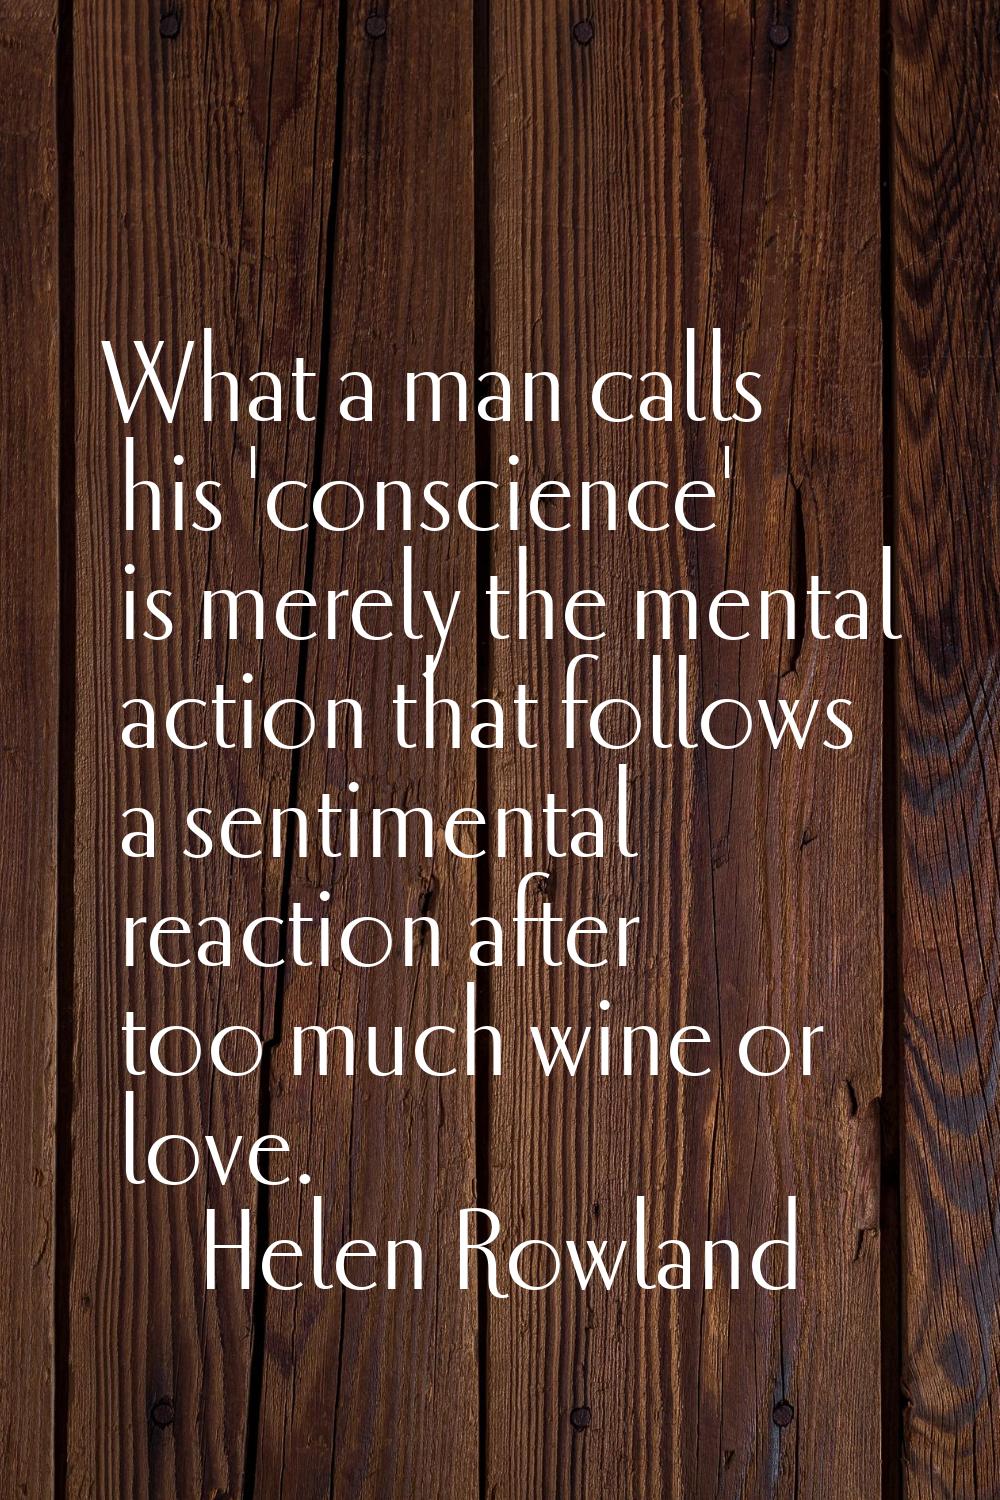 What a man calls his 'conscience' is merely the mental action that follows a sentimental reaction a